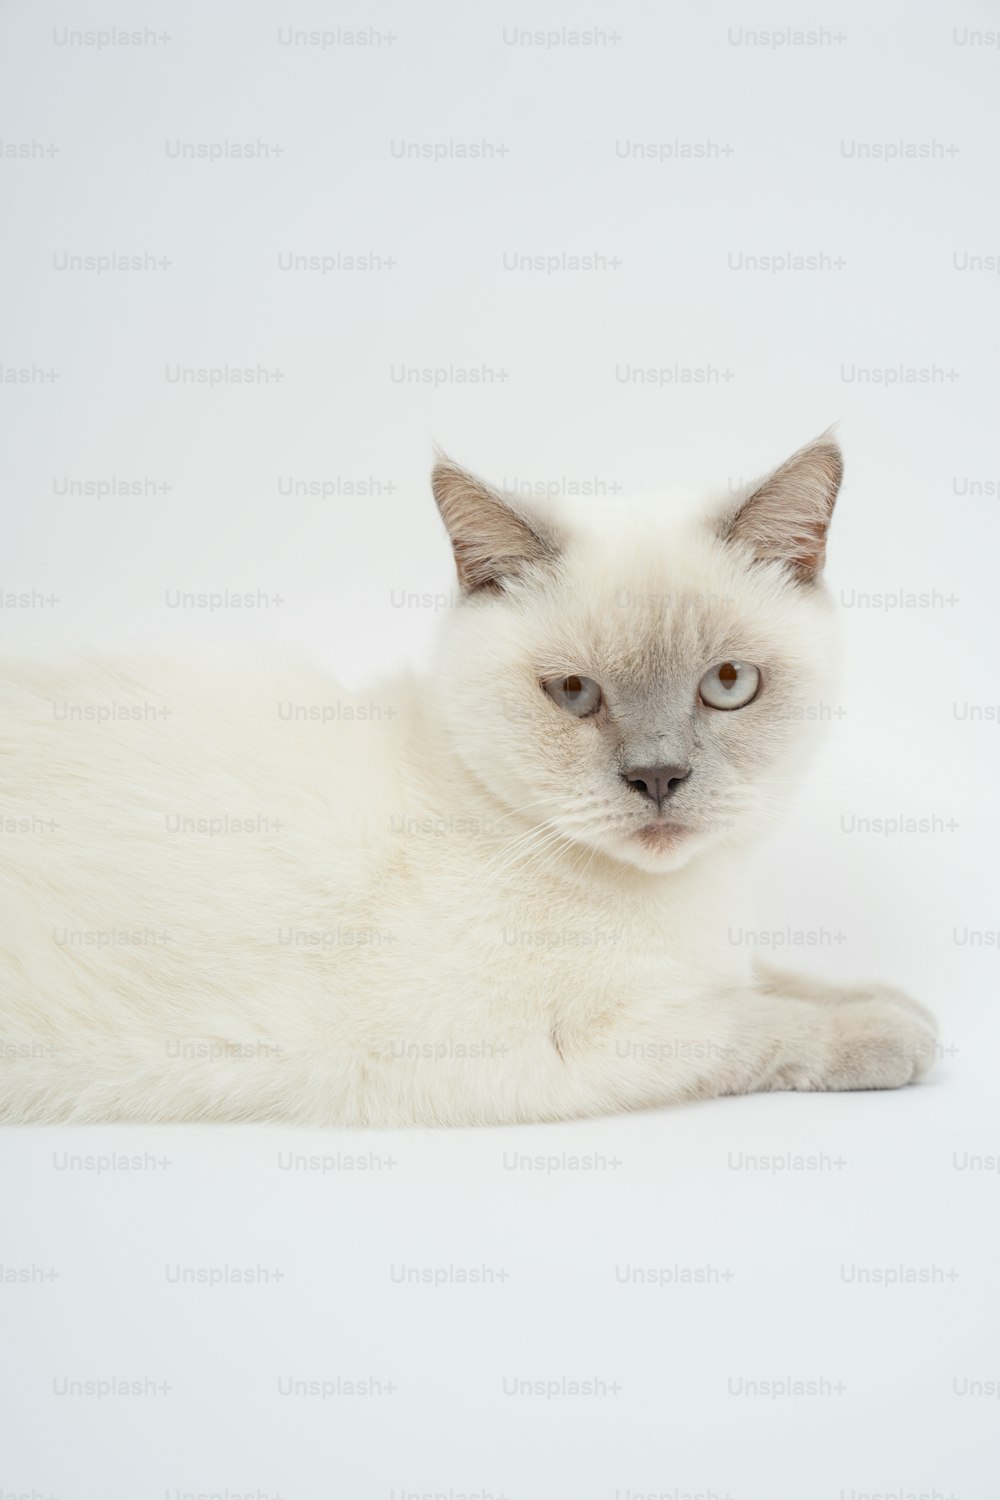 a white cat with blue eyes laying down